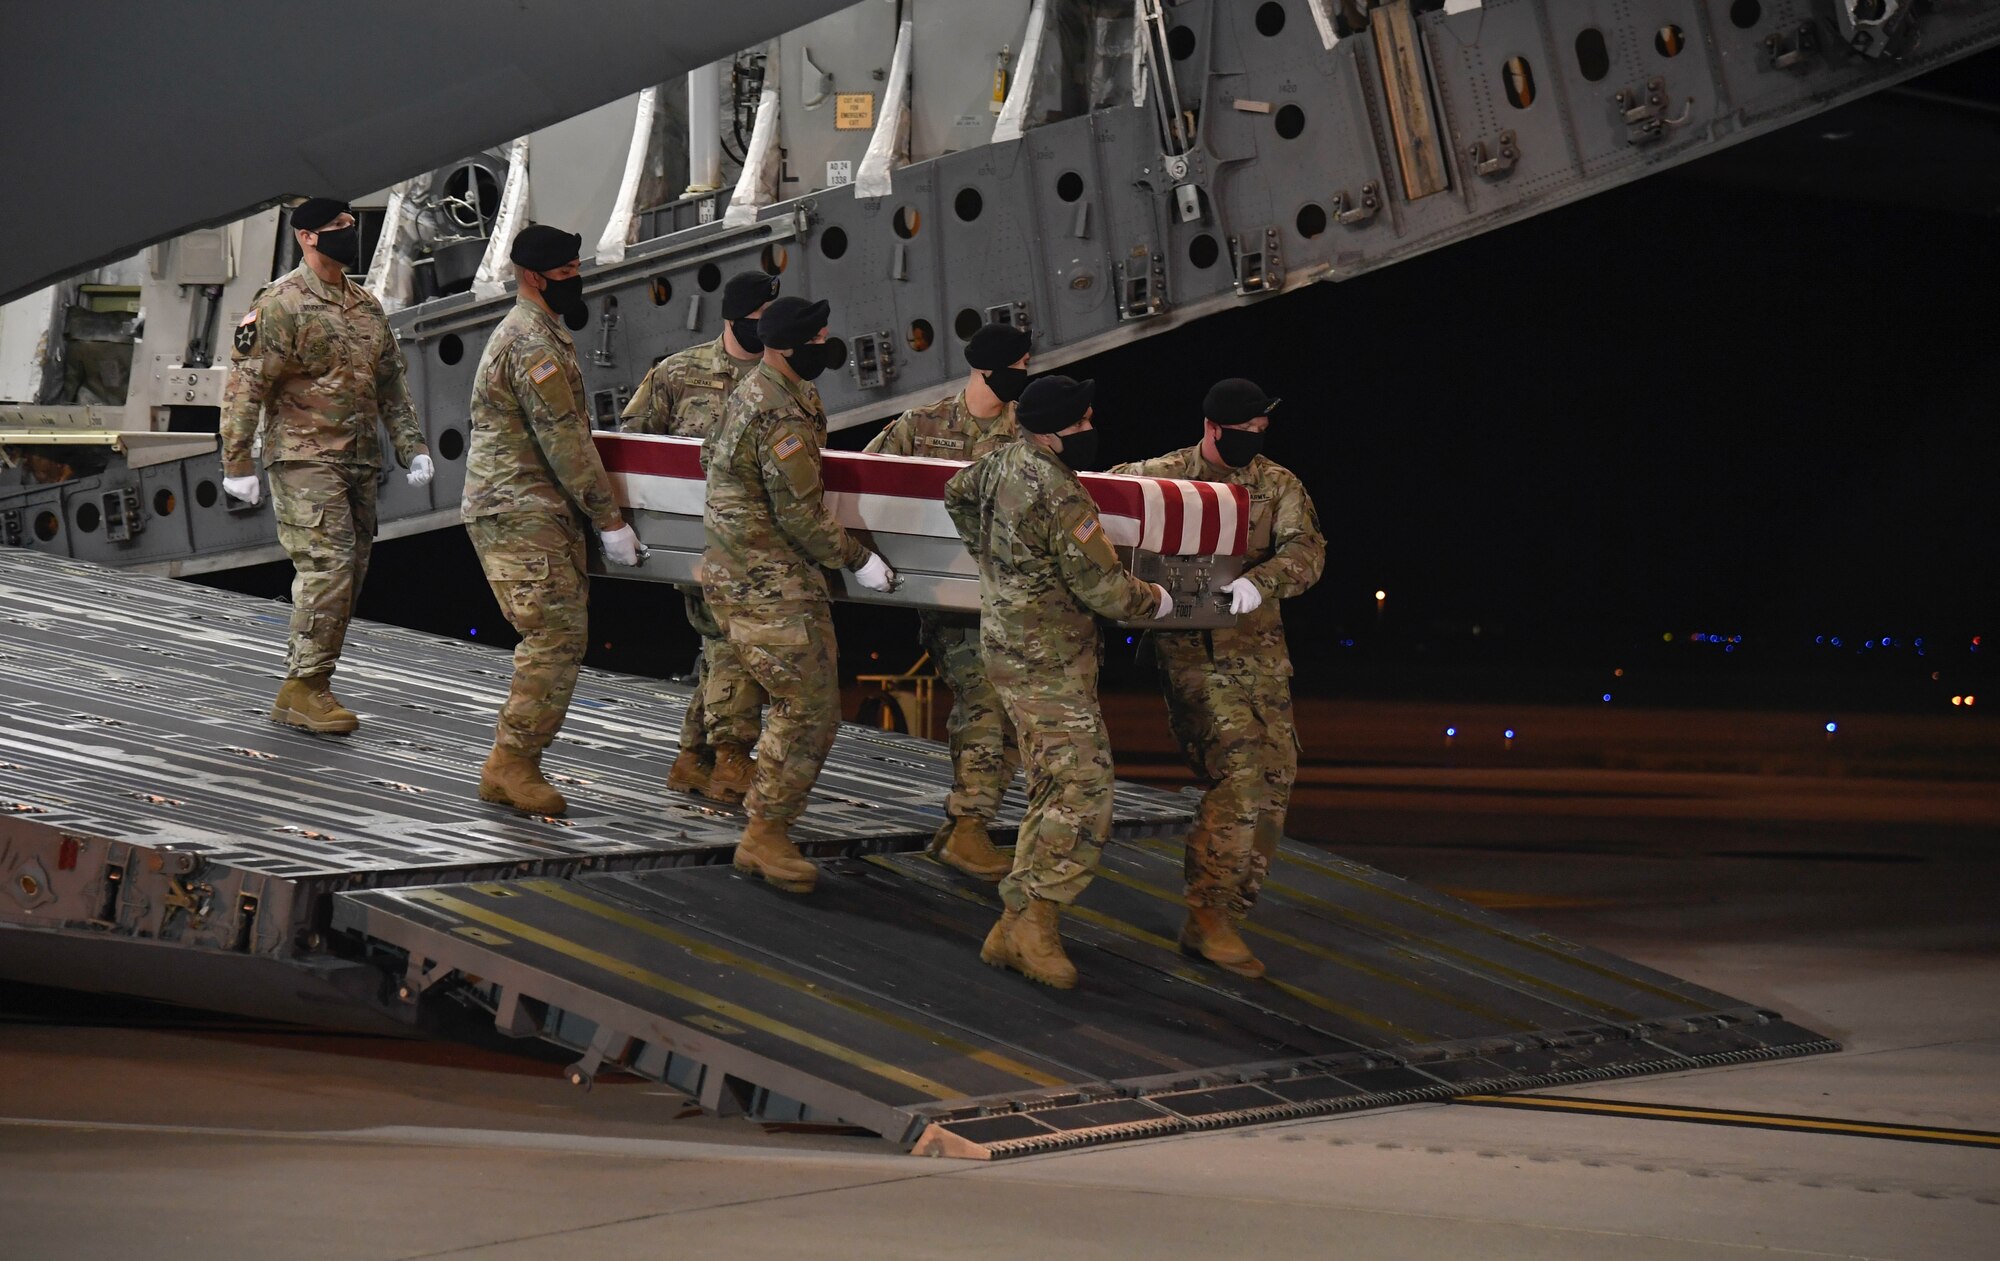 A U.S. Army carry team transfers the remains of Sgt. Bryan C. Mount of St. George, Utah, during a dignified transfer July 26, 2020 at Dover Air Force Base, Delaware. Mount was assigned to the 1st Squadron, 73rd Cavalry Regiment, 2nd Brigade Combat Team, 82nd Airborne Division, Fort Bragg, North Carolina. (U.S. Air Force Photo by Senior Airman Eric M. Fisher)